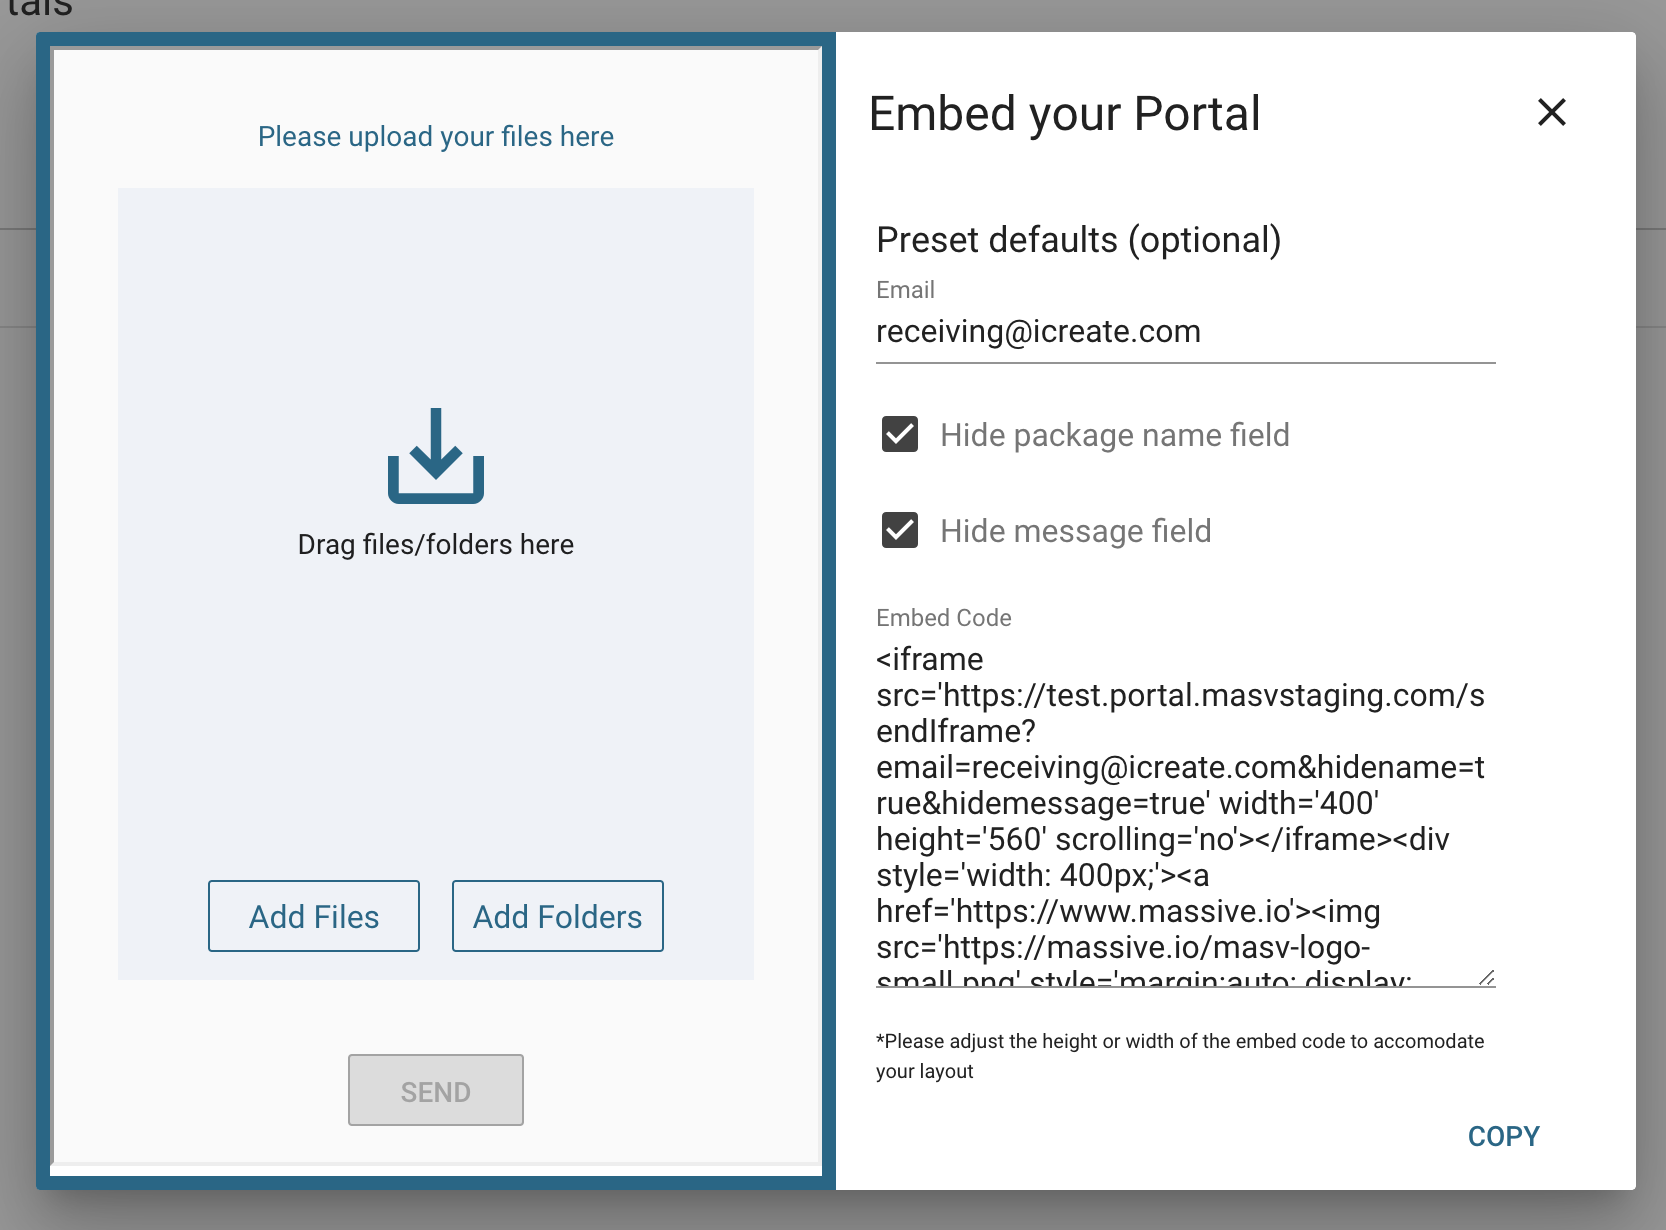 Embed Portals by email message